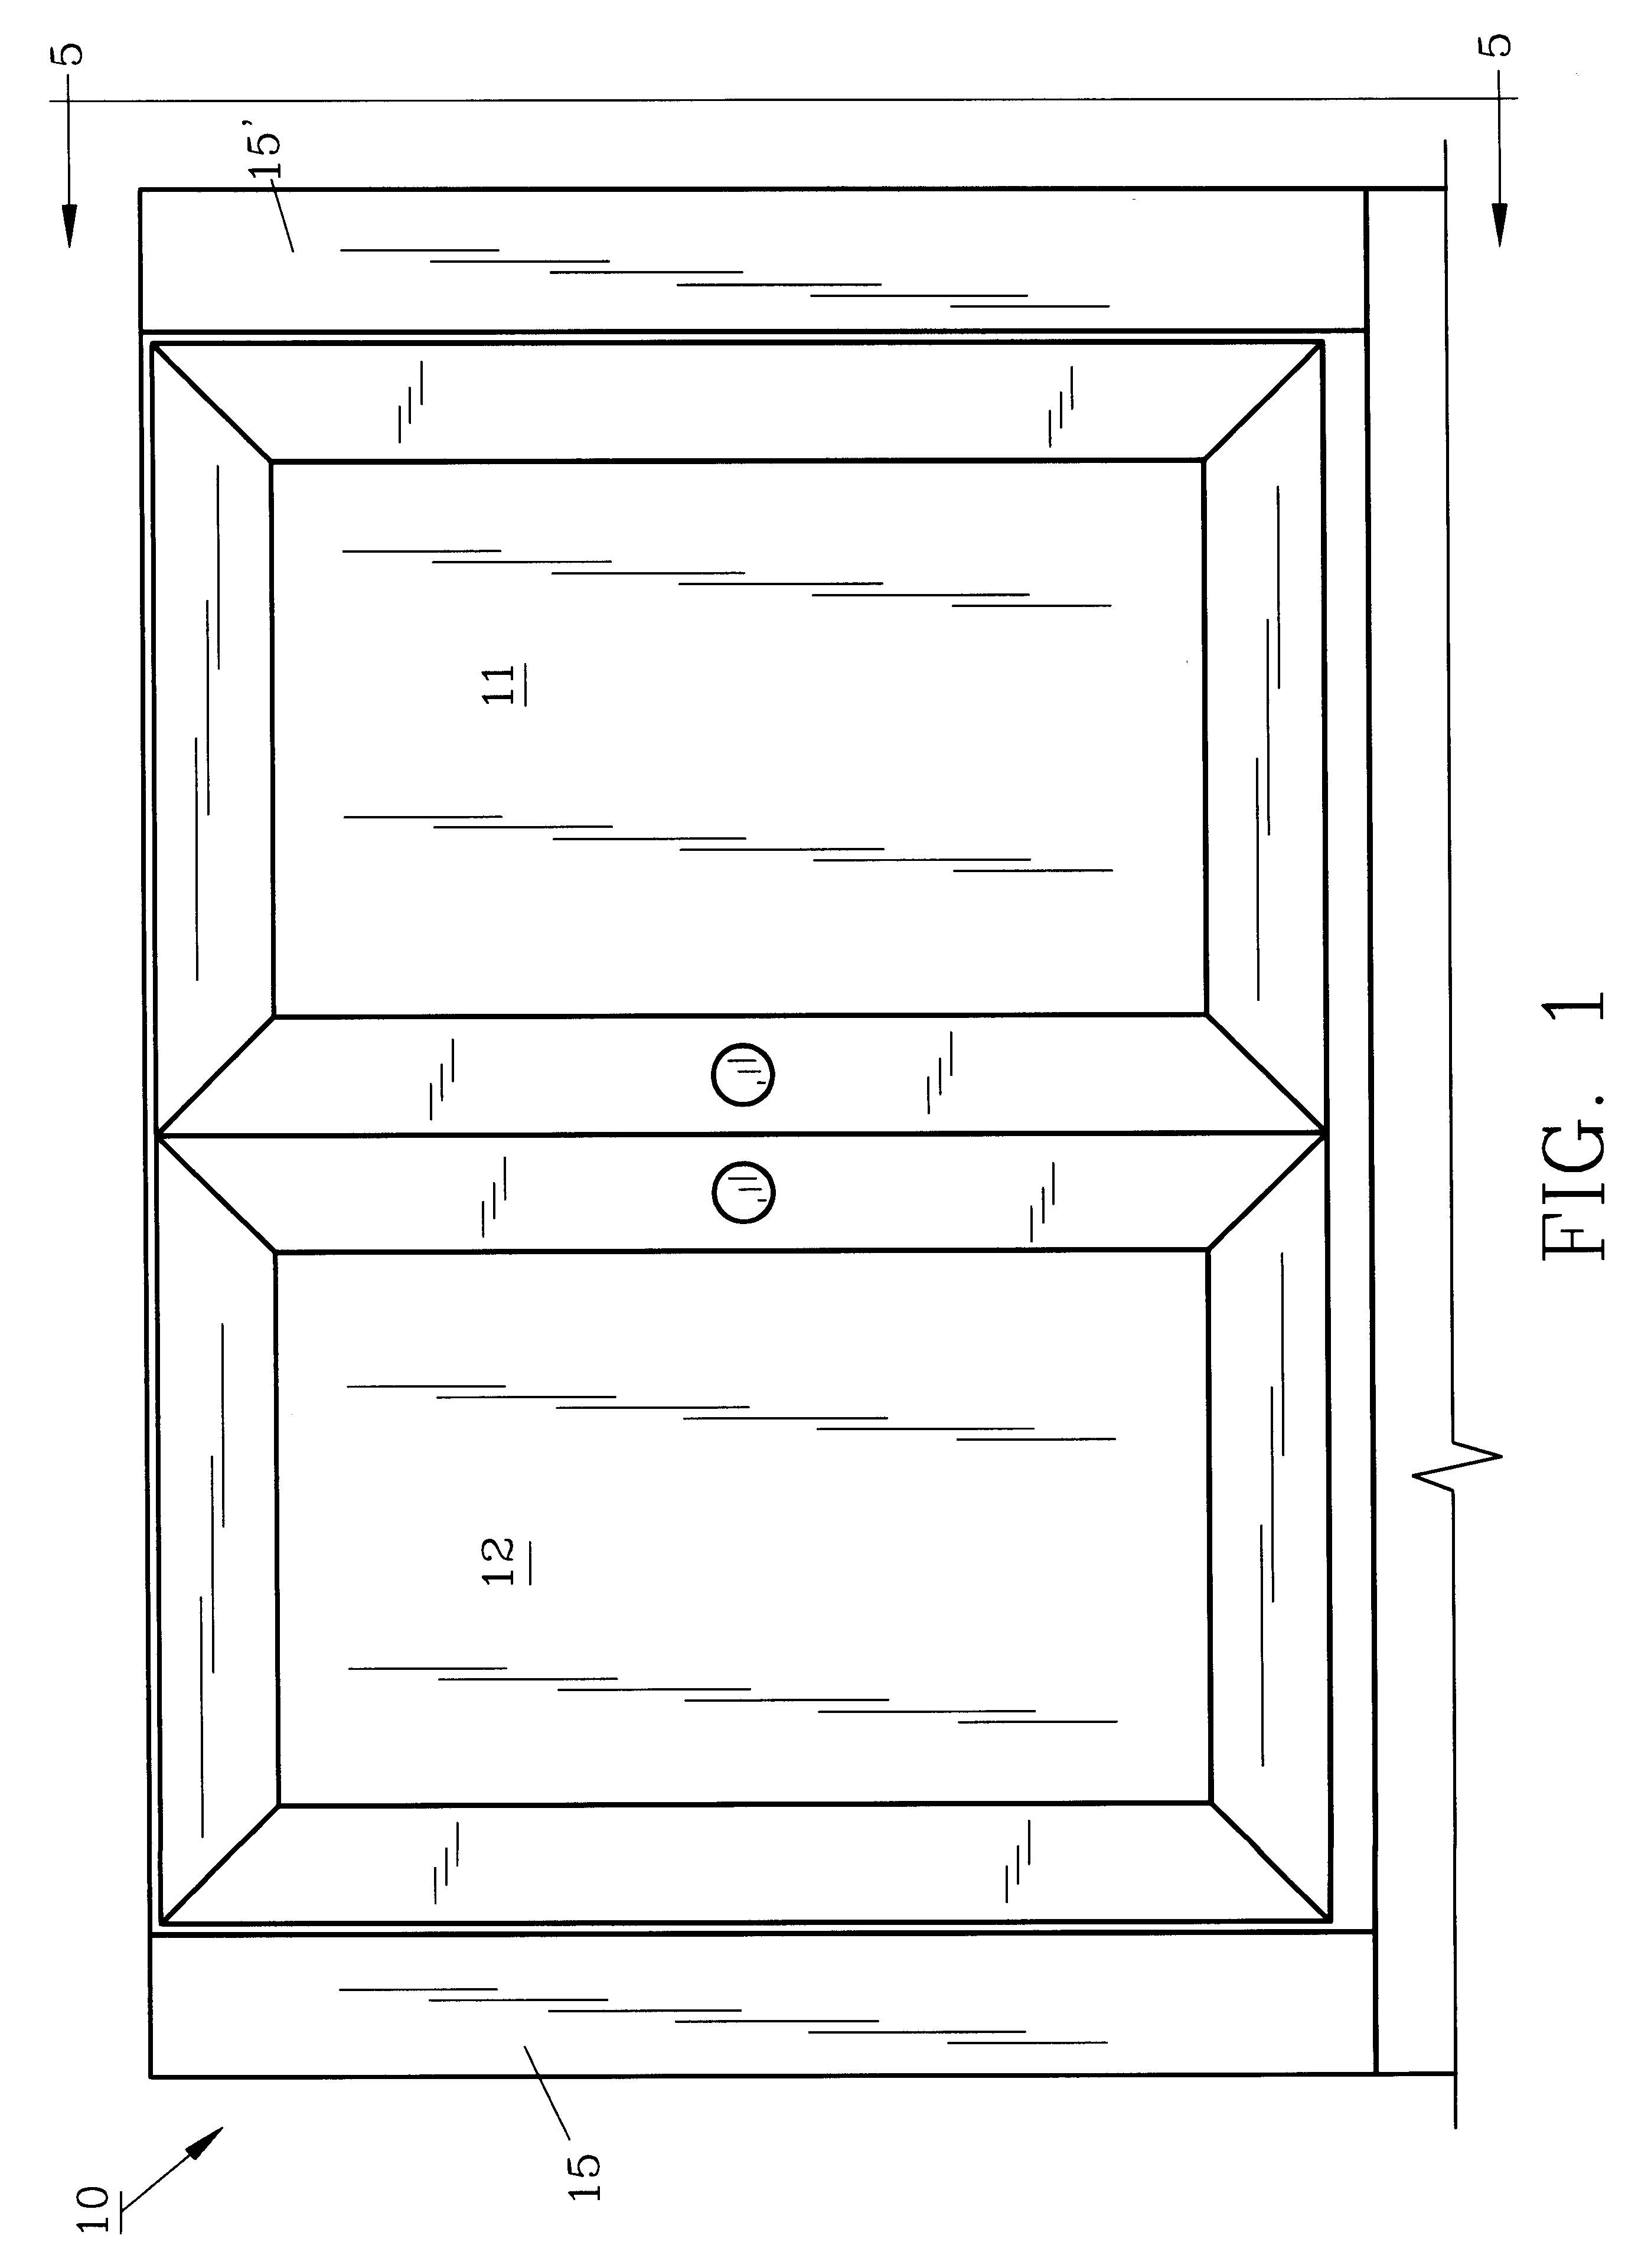 Sliding door hardware assembly and method